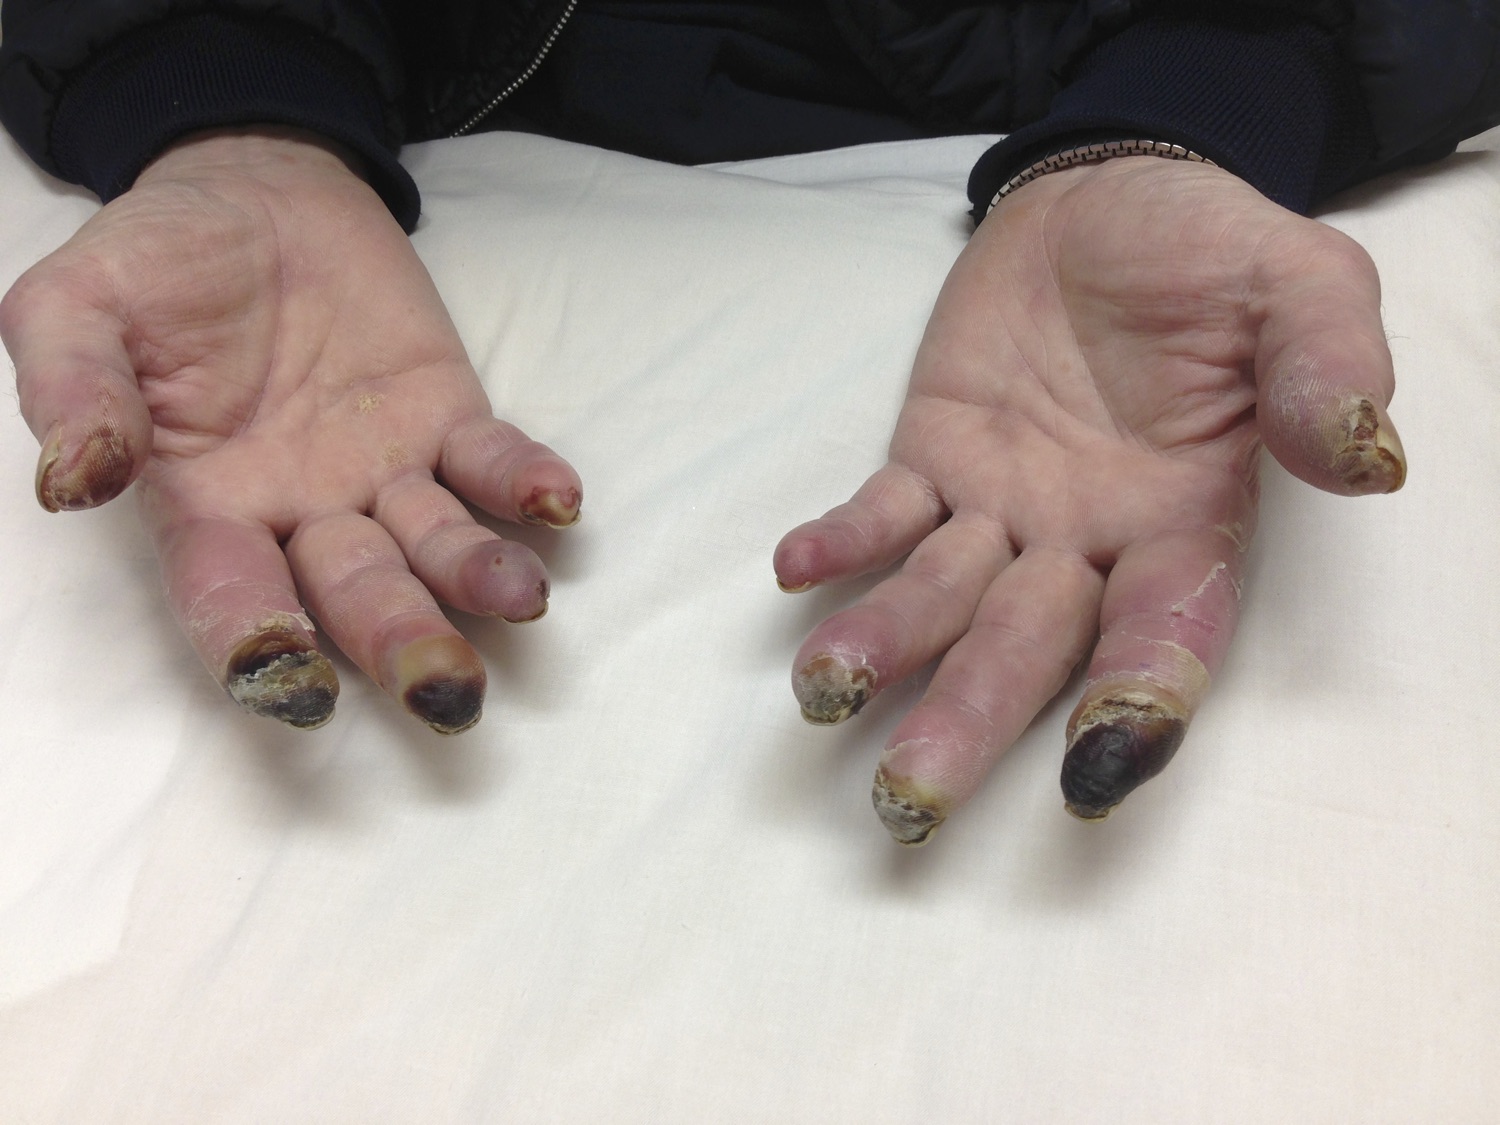 Buerger's disease (Thrombangitis Obliterans): This patient has Thrombangitis obliterans ( Buerger’s disease), a non-atherosclerotic, segmental, inflammatory disease that affects the small to medium-sized arteries and veins of the hands and feet that is closely associated with smoking. It is not a true vasculitis, rather, there are inflammatory occlusive thrombi found in the affected vessels. (Image Credit: Dr. Lori Albert)